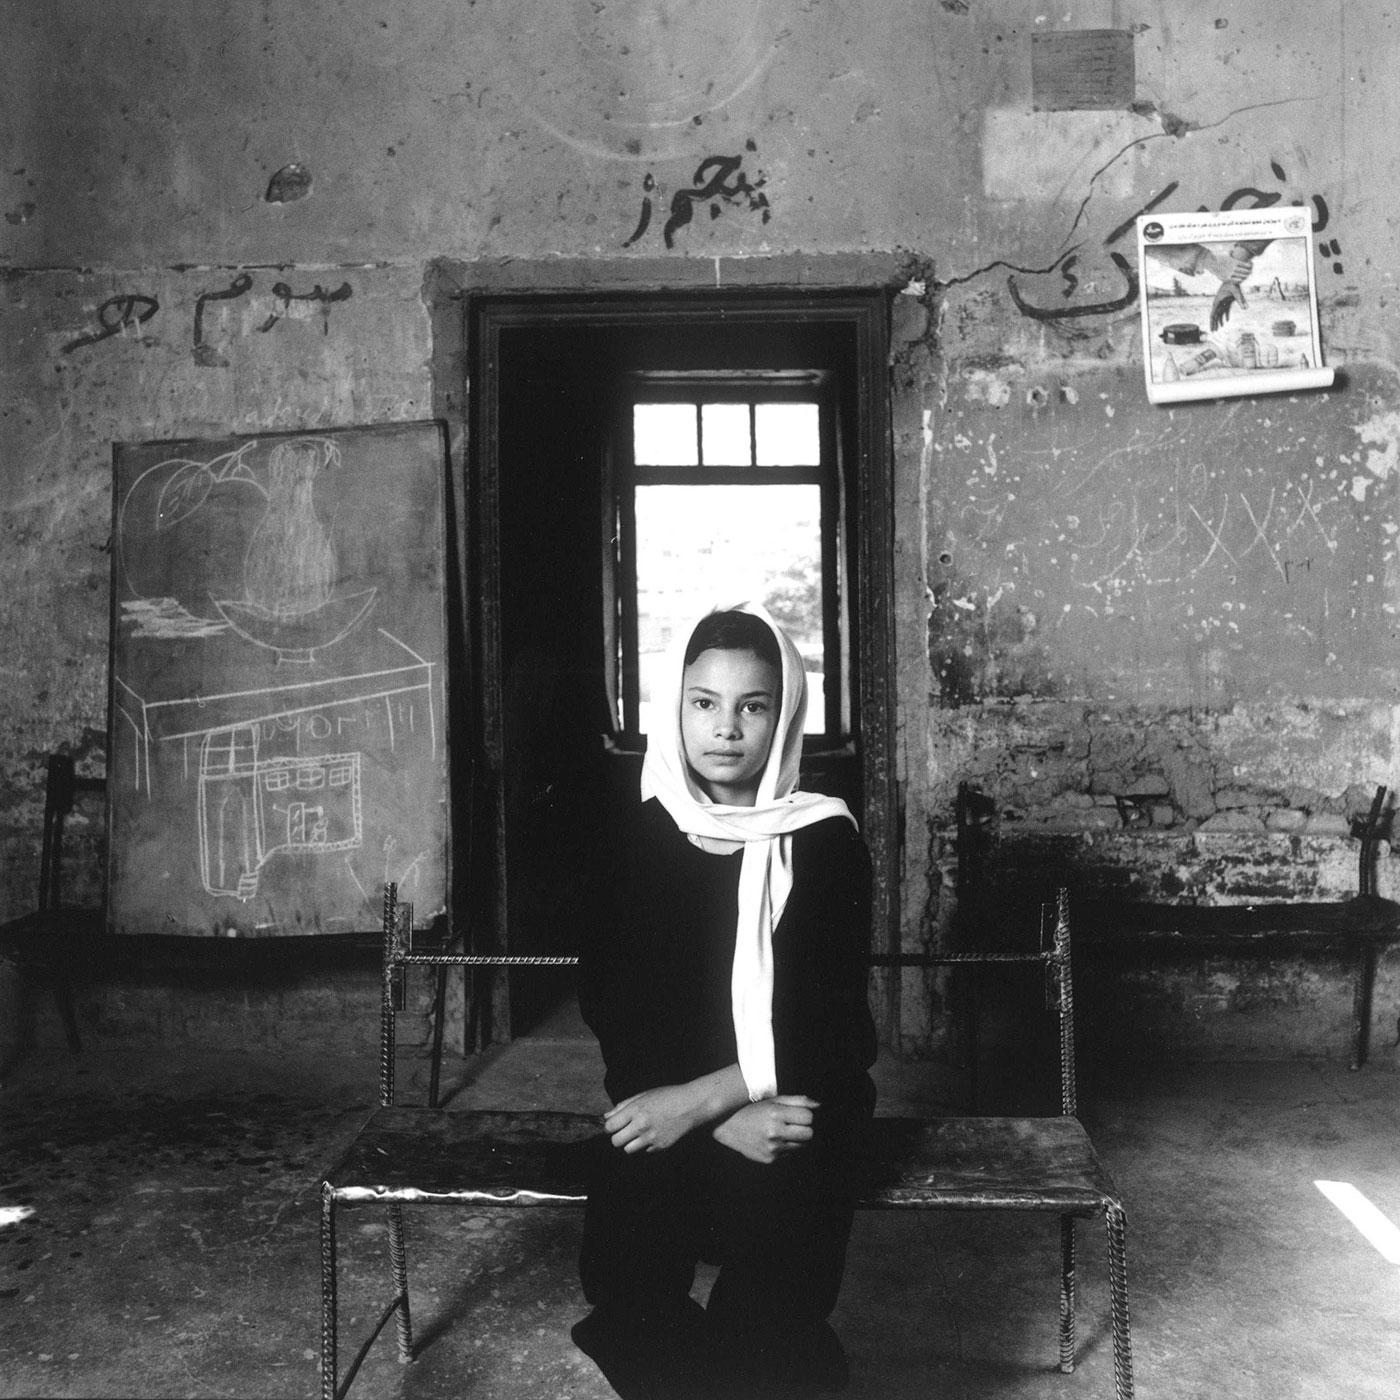 Black and white photograph of a young girl wearing a loose head scarf and dark clothing sitting on a metal bench in a classroom with stone walls.